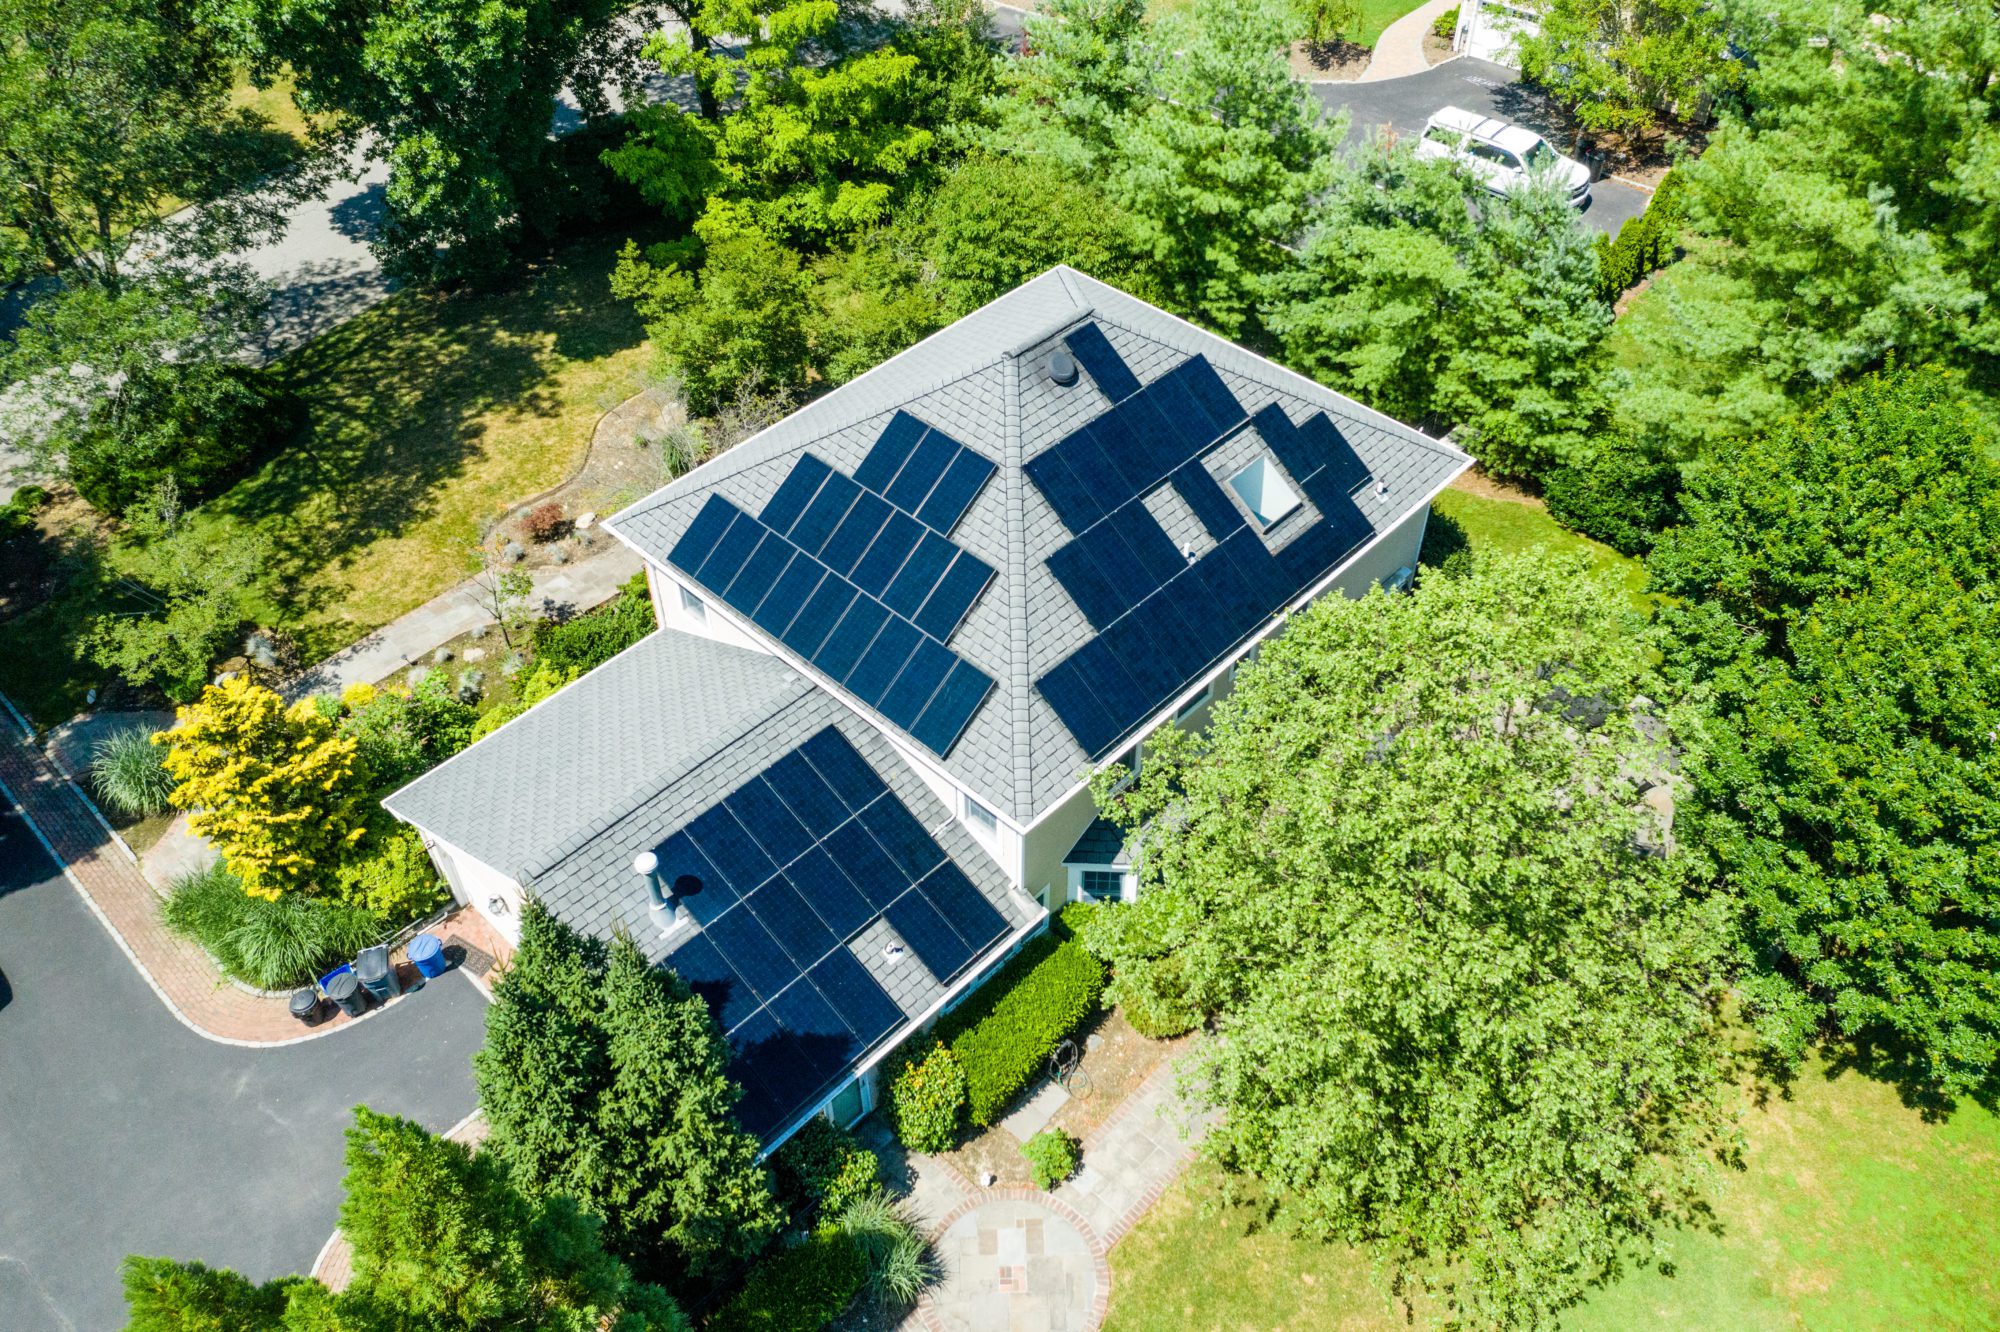 A house on Long Island with solar panels. Net metering allows homes to send excess electricity back to the grid and receive a lower bill.